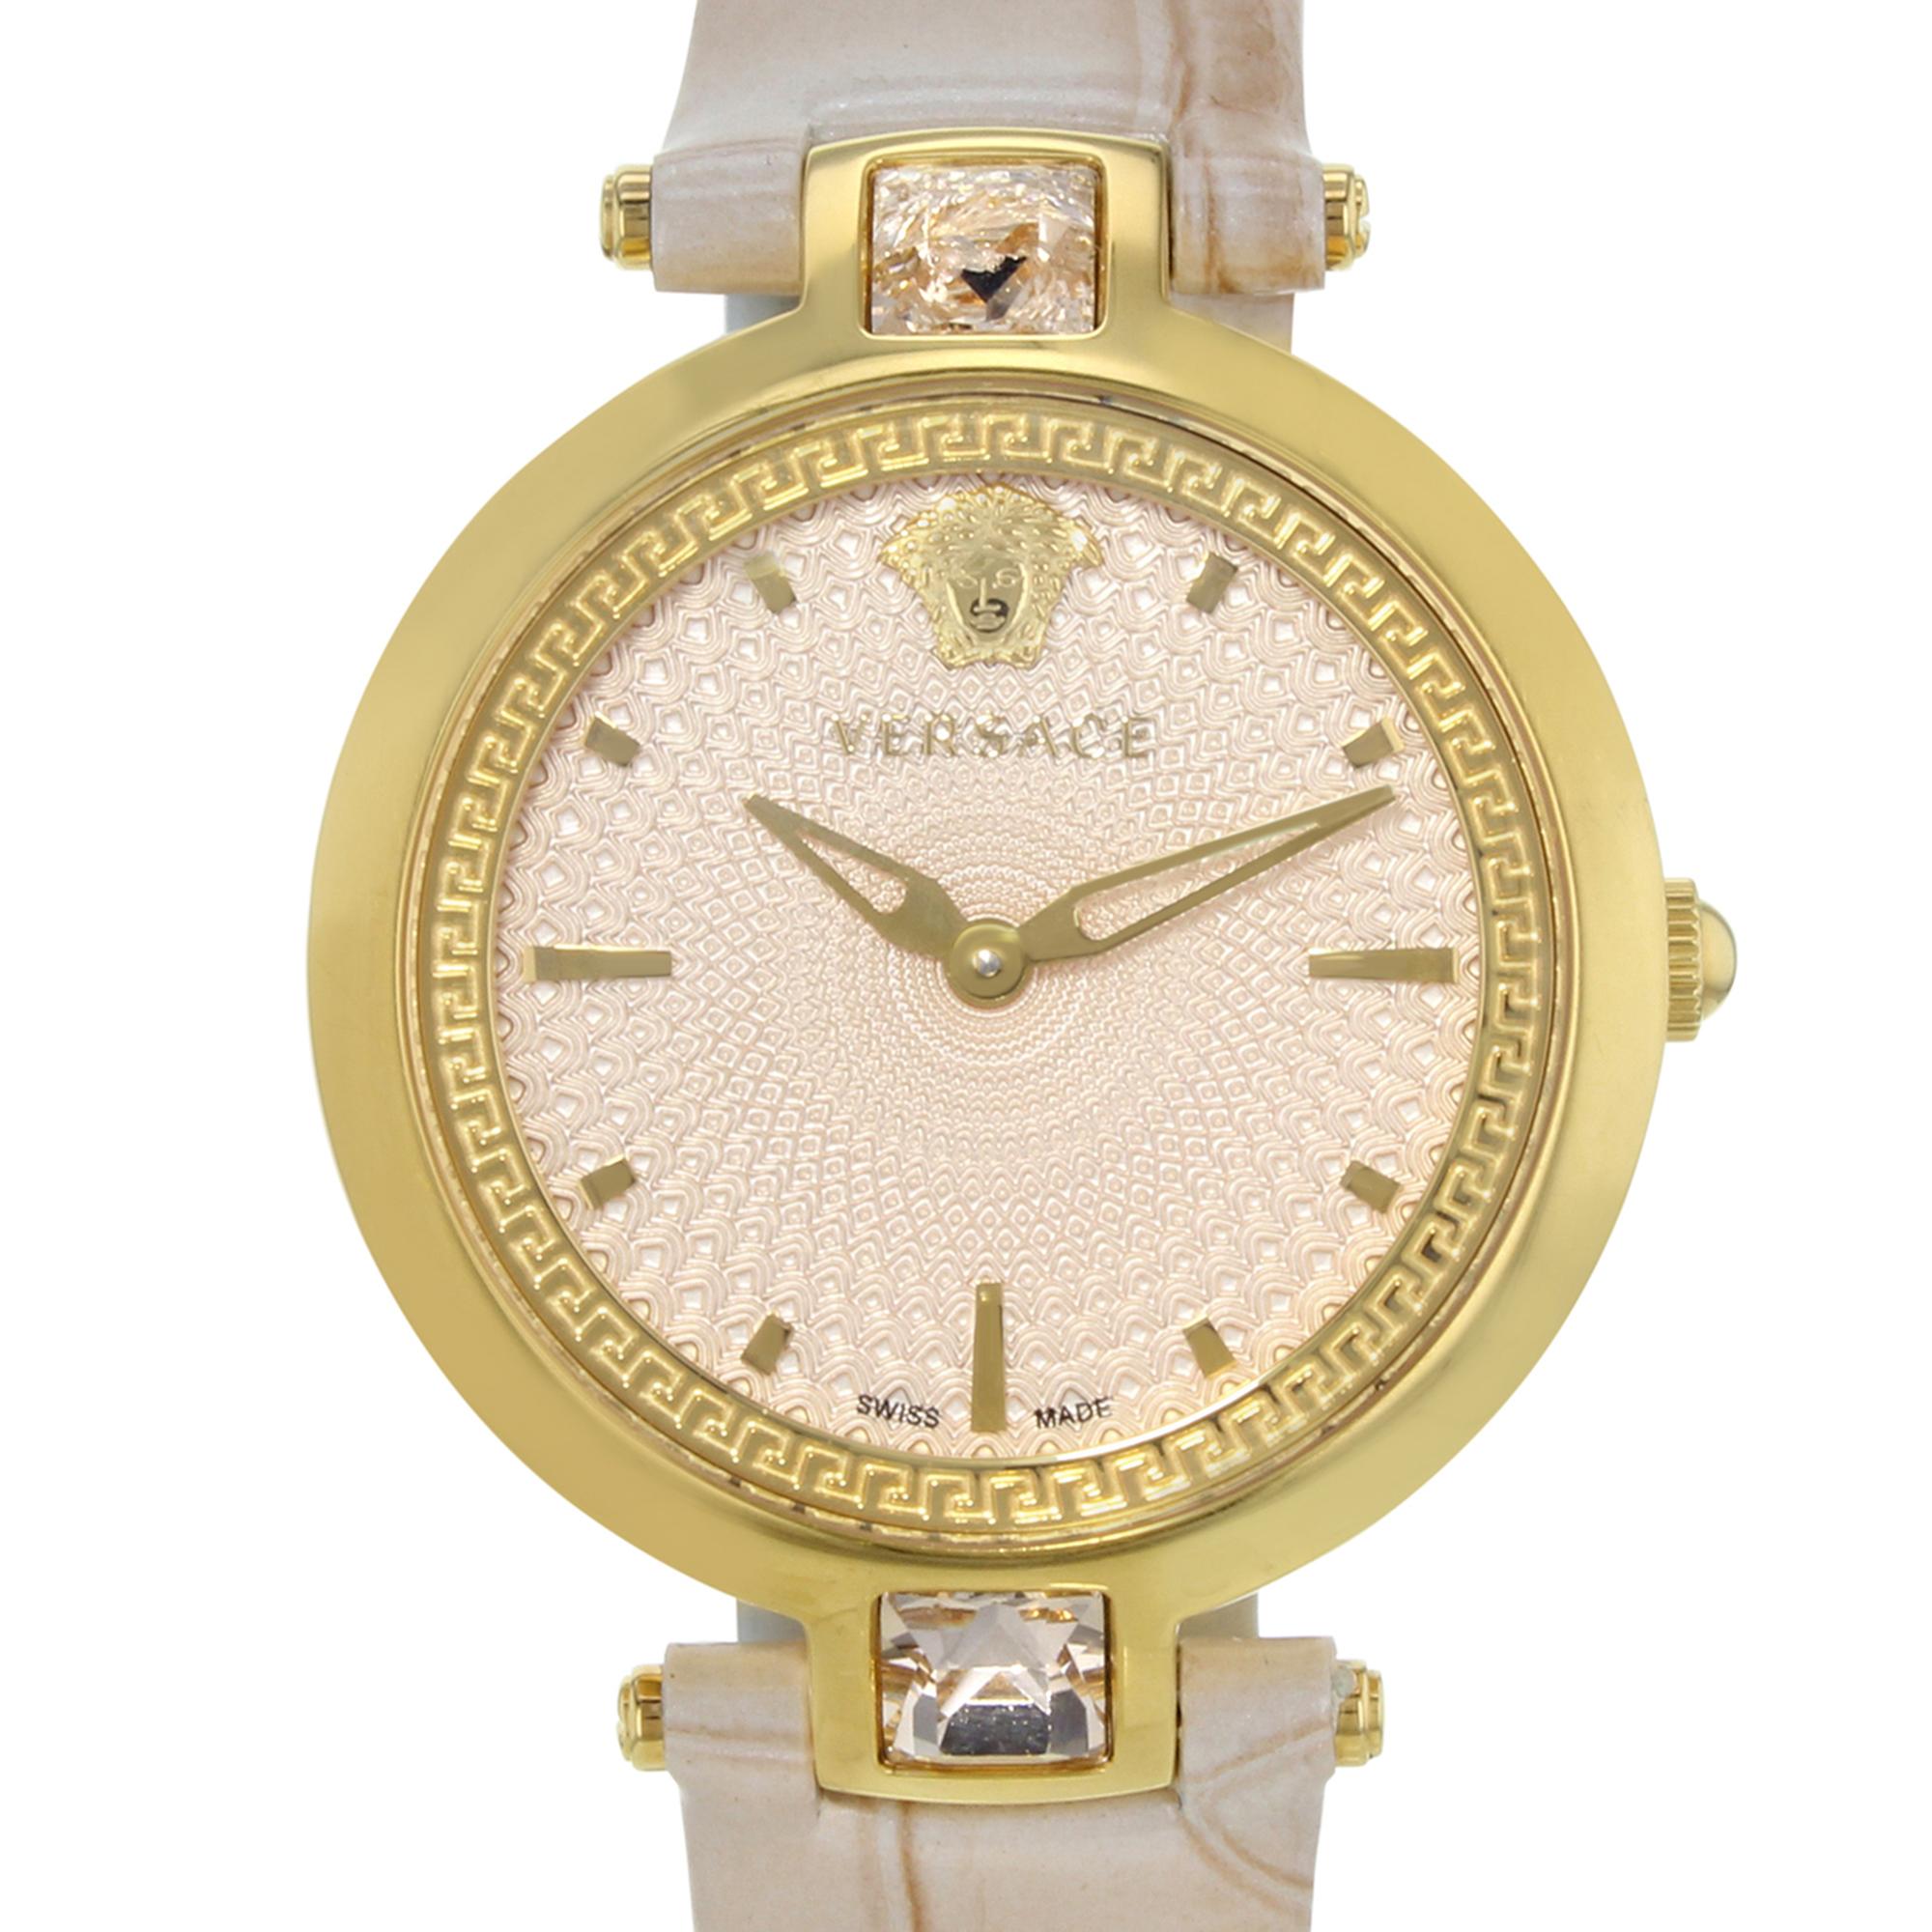 This pre-owned Versace Olympo VAN050016 is a beautiful Ladies timepiece that is powered by a quartz movement which is cased in a stainless steel case. It has a round shape face, dial and has hand sticks style markers. It is completed with a leather